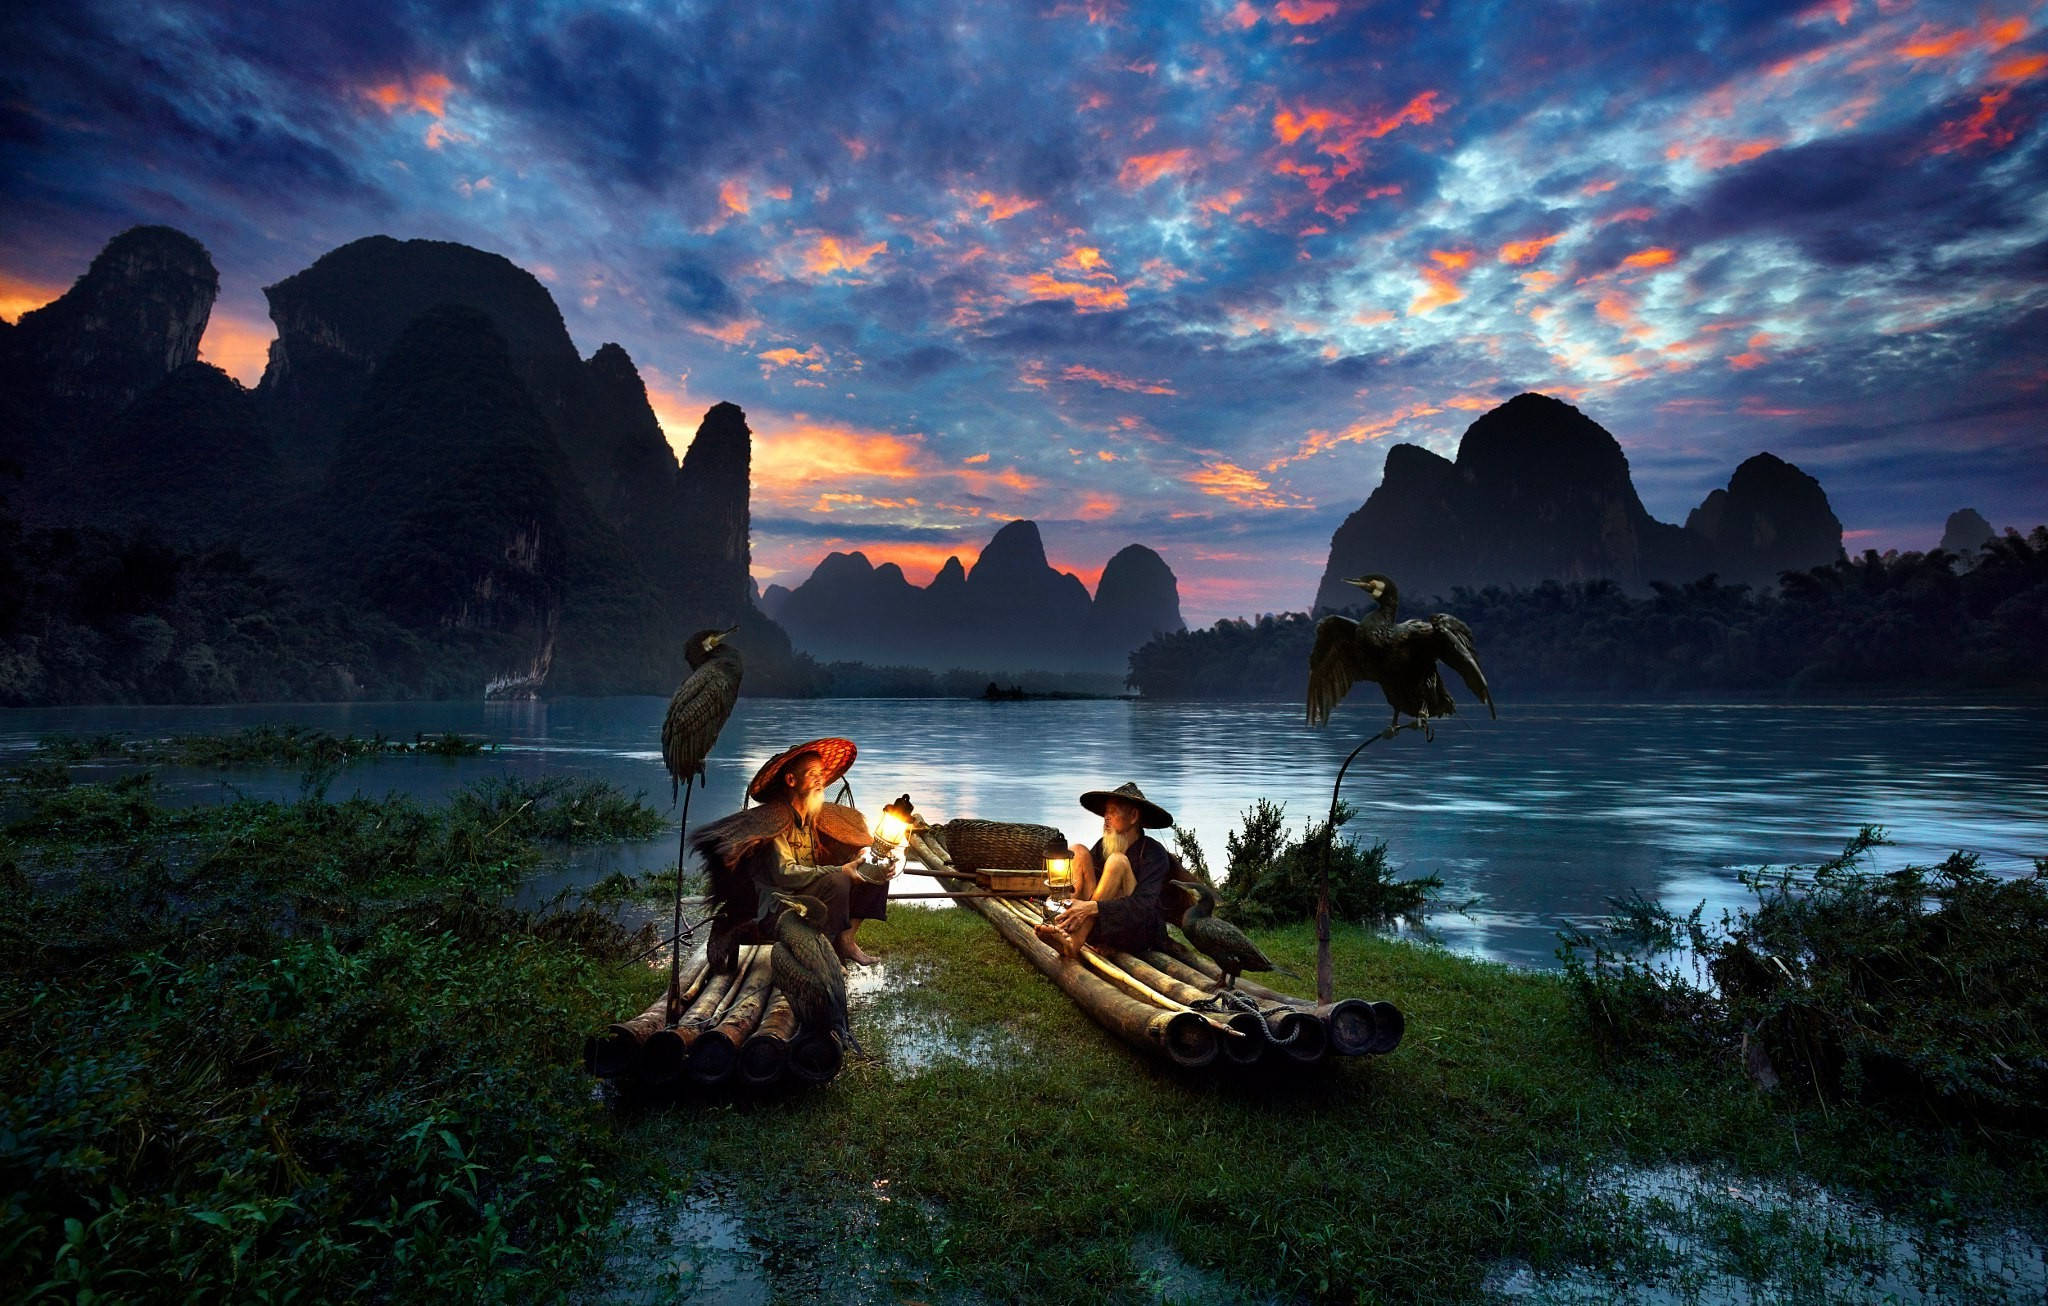 Download Two People On Boats With Birds In Nature Wallpaper